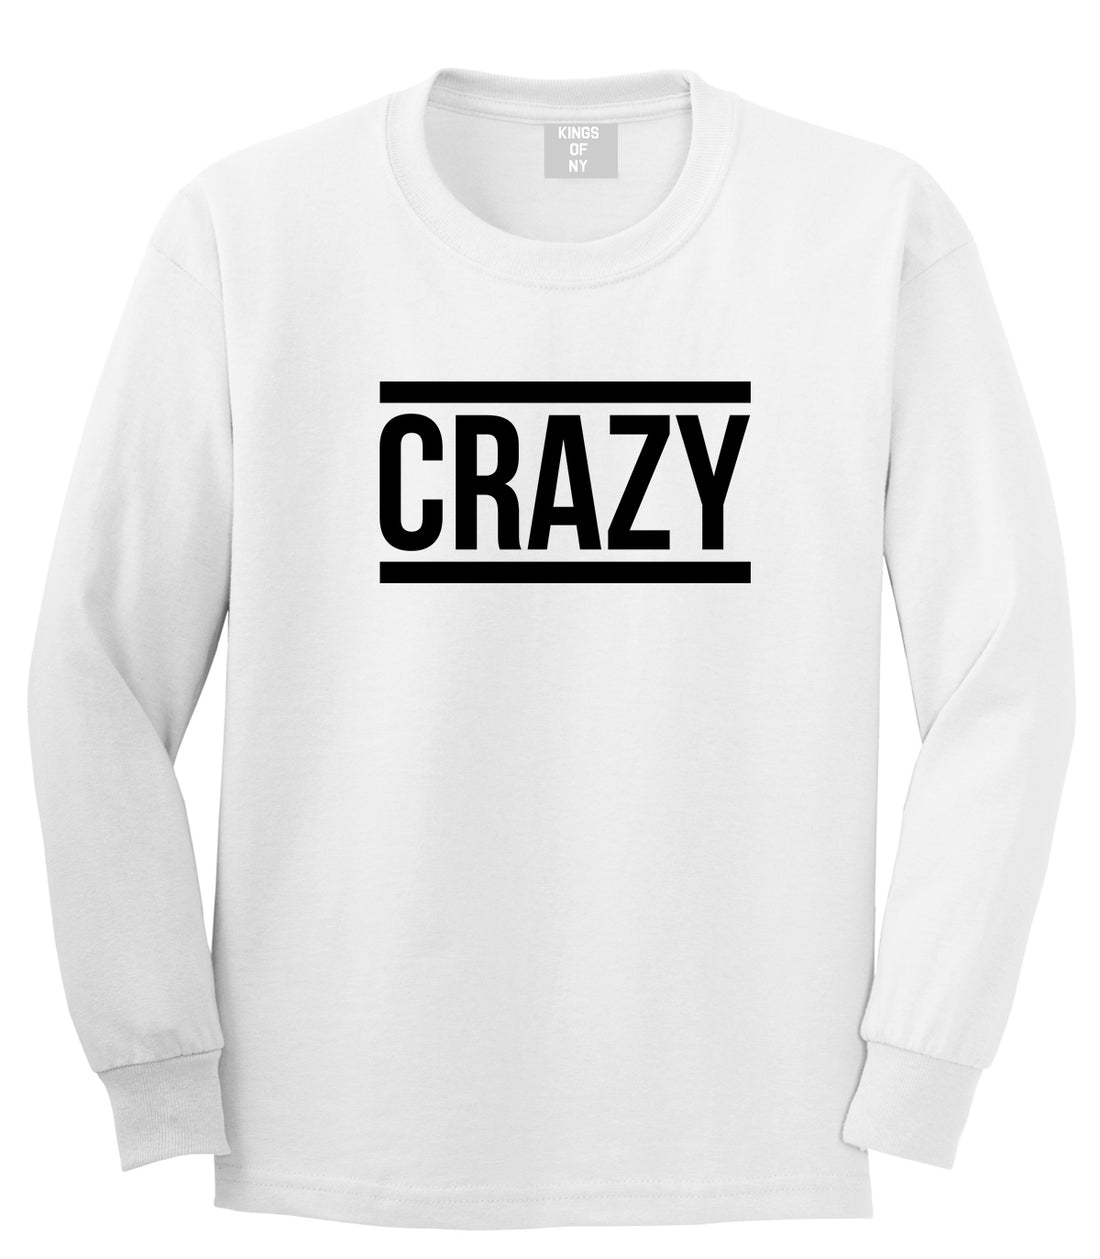 Crazy White Long Sleeve T-Shirt by Kings Of NY